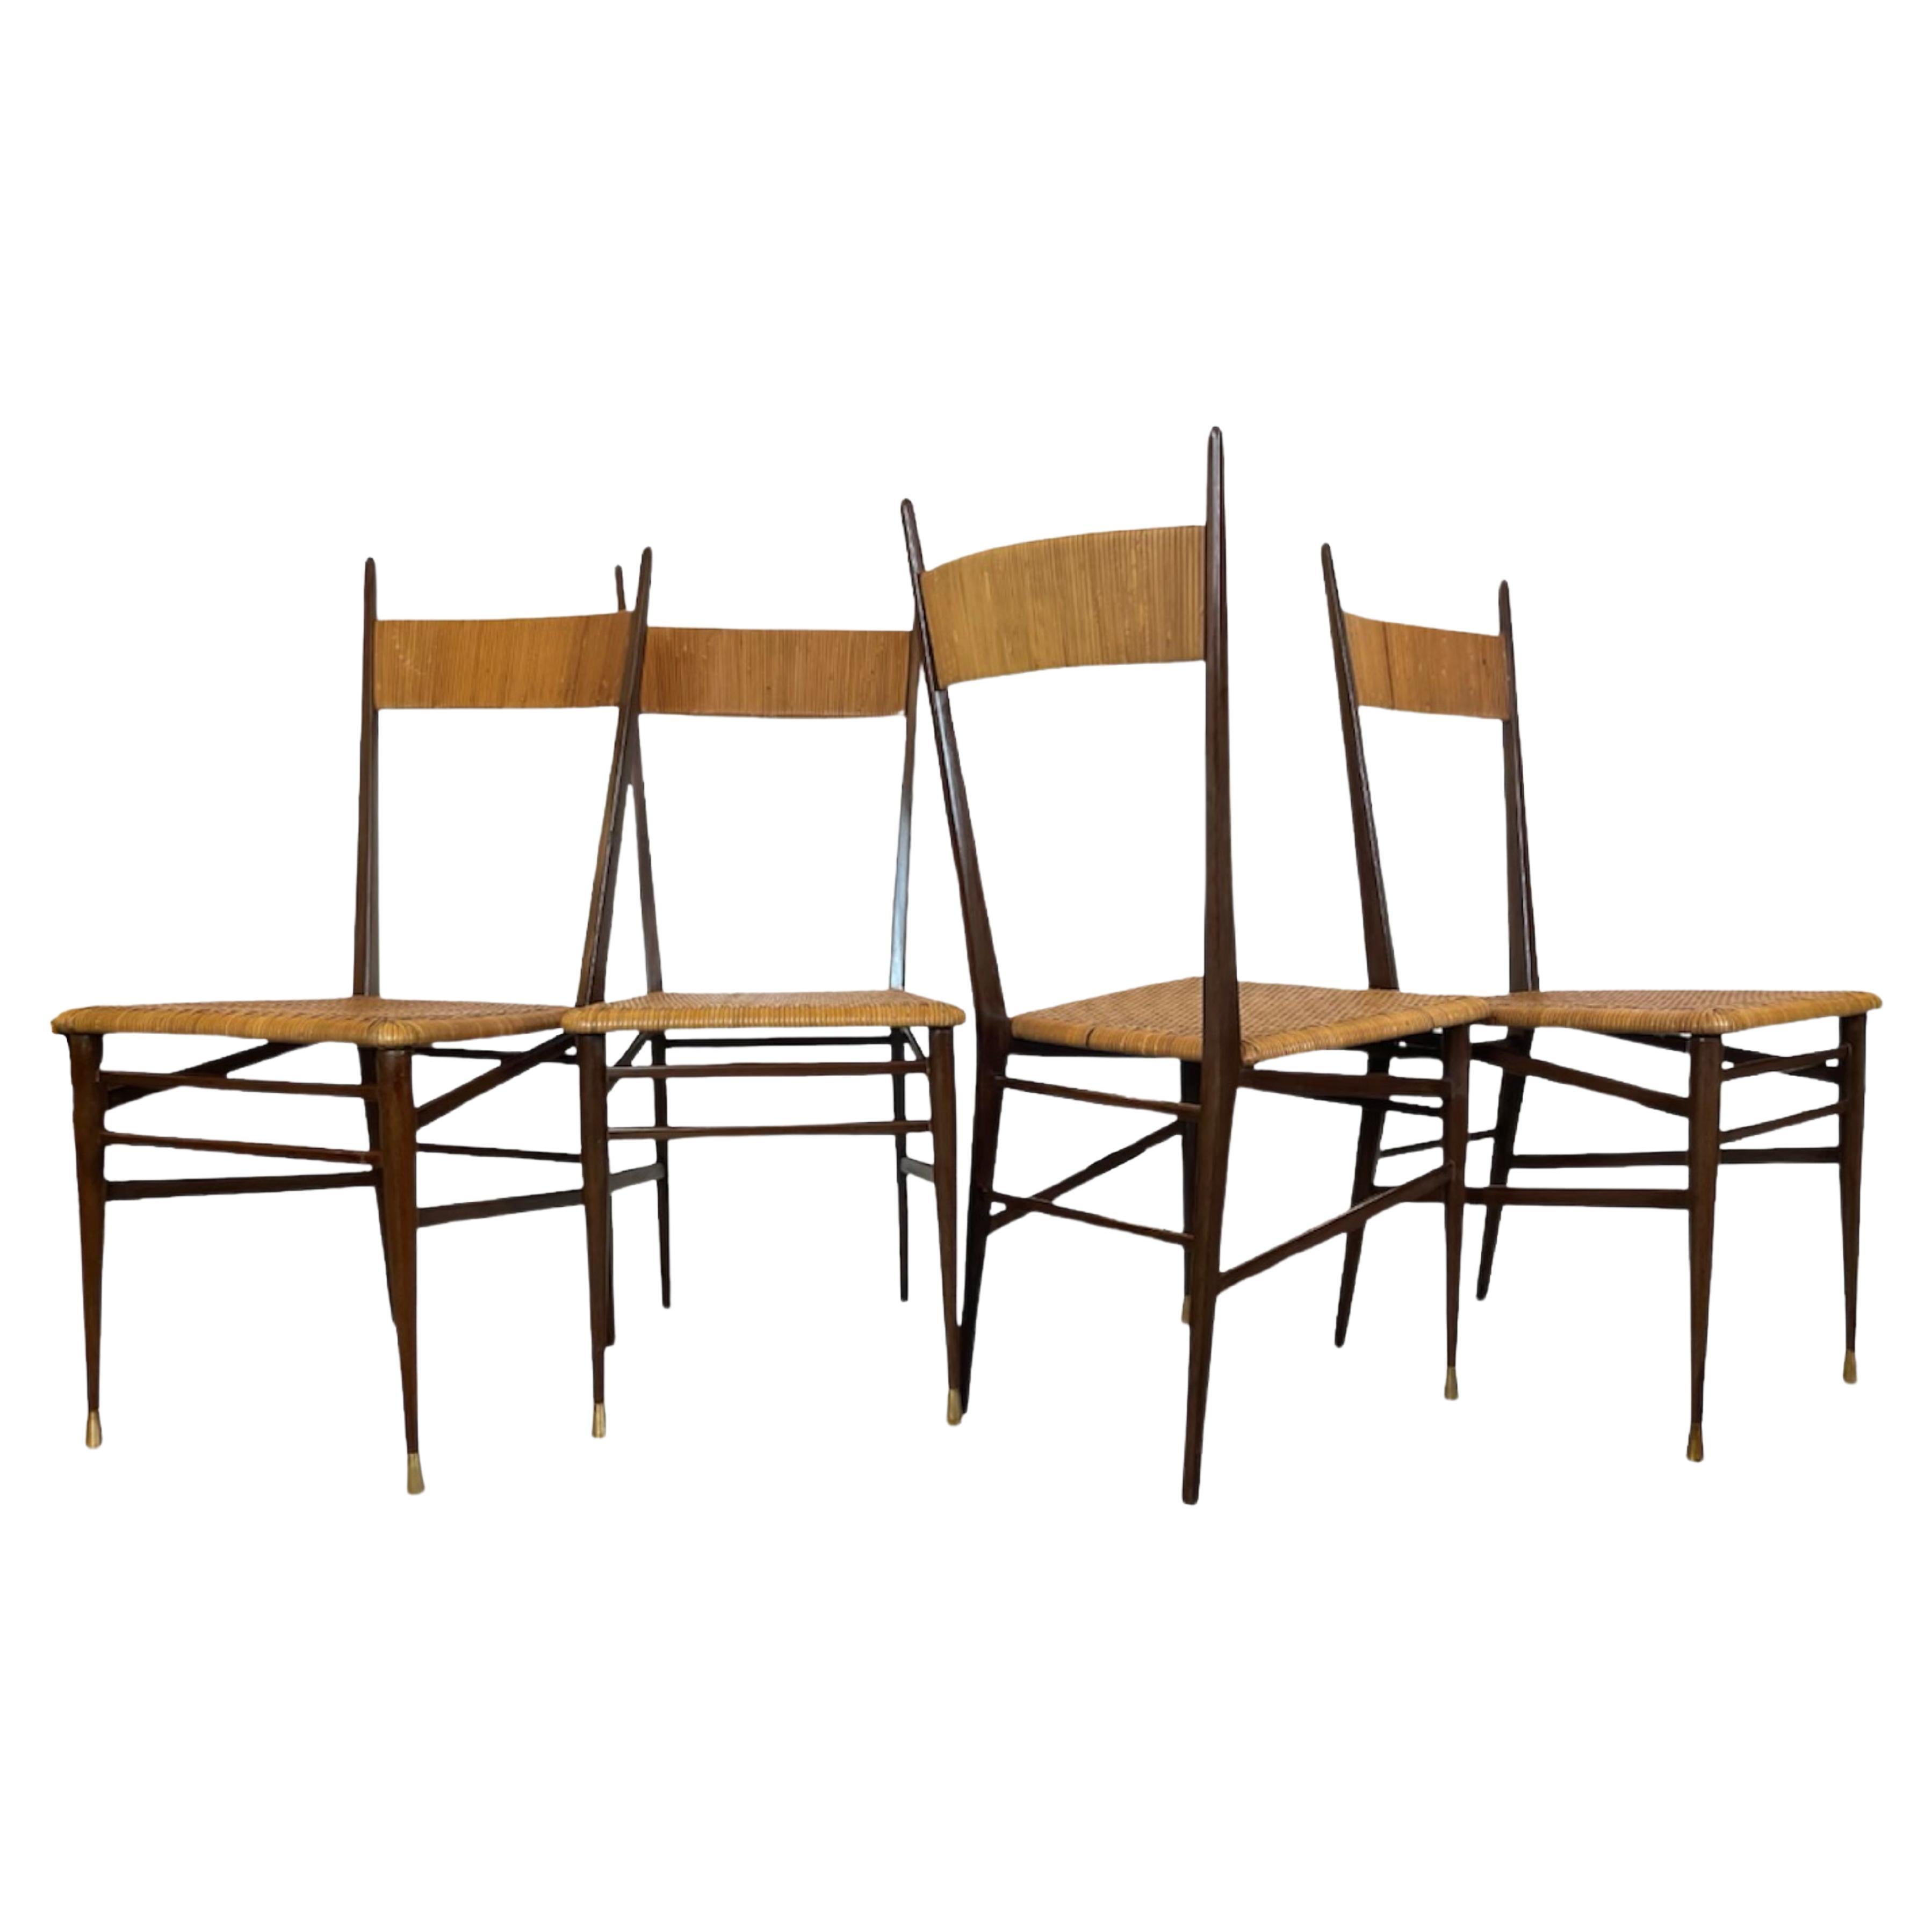 Set of four Italian design chairs, Scuola di Torino, circa 1950s.
4 traditional Italian Chiavari , in the manner of Gio Ponti and Superleggera.
Featuring solid wood frame, with woven rattan seats and backrests. 
Each set of 2 front legs are finished